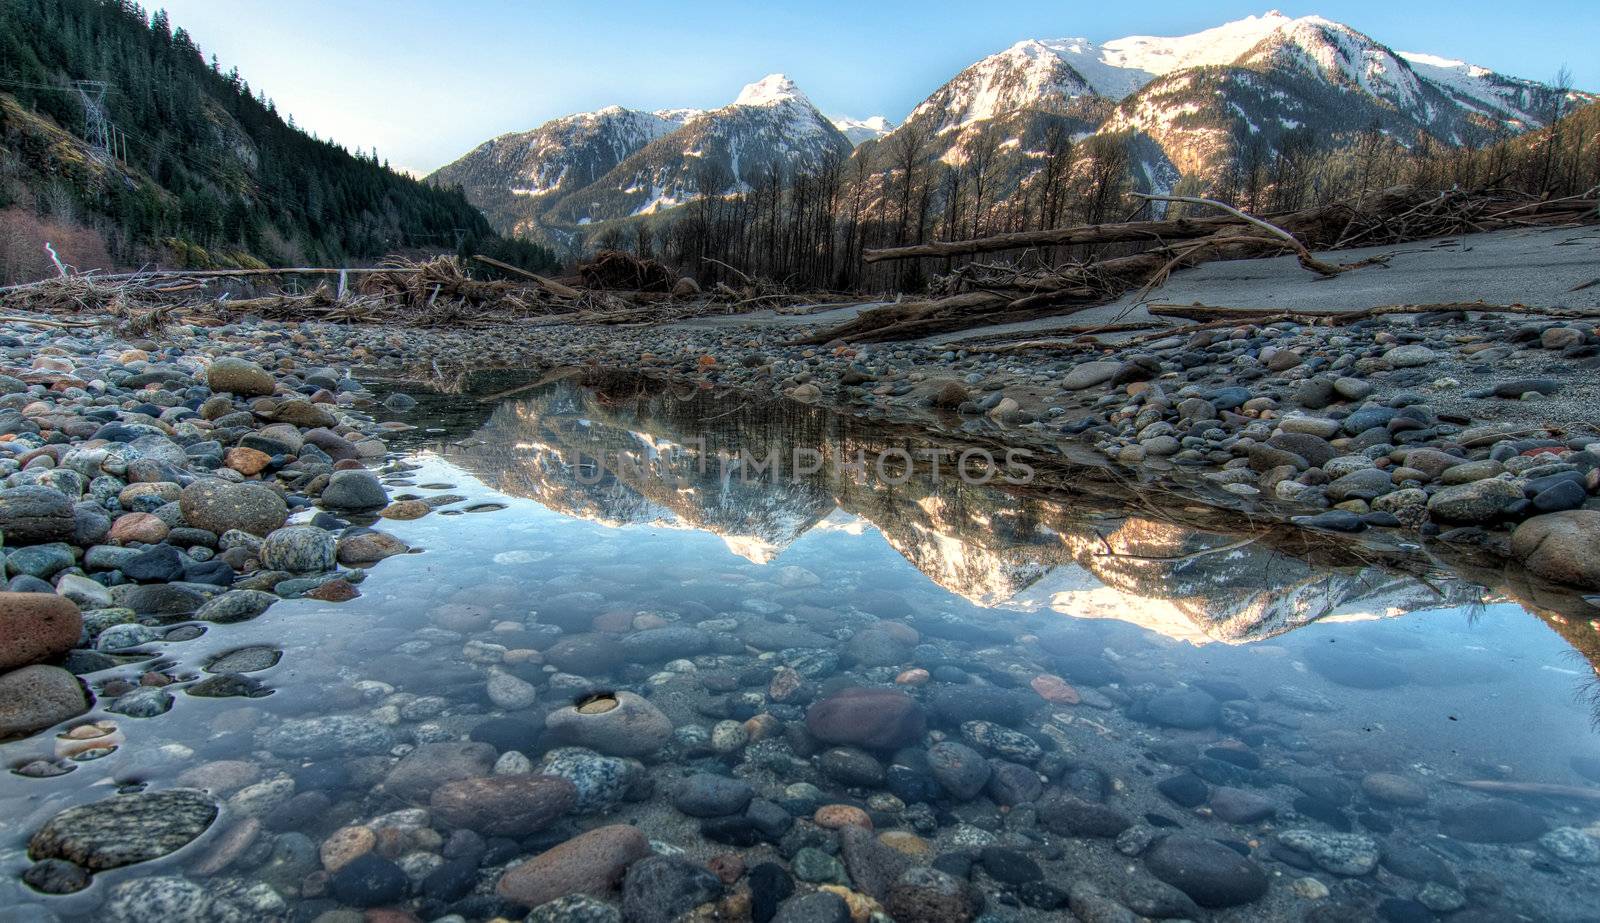 Mountain Reflection in Still River Side Pool by JamesWheeler